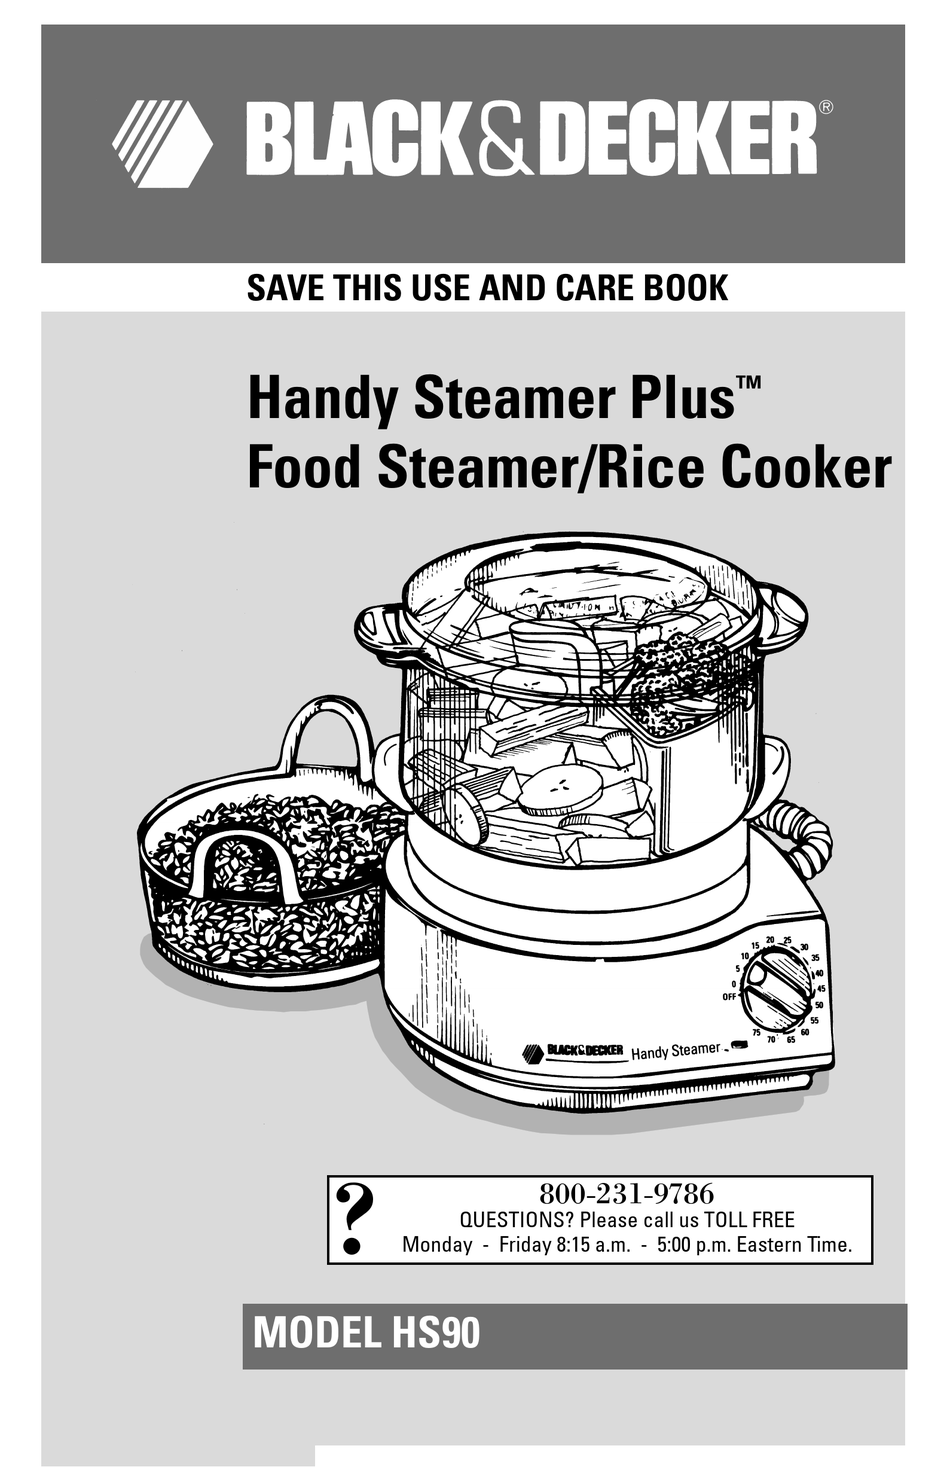 Black & Decker RC3406 6-Cup Rice Cooker, White